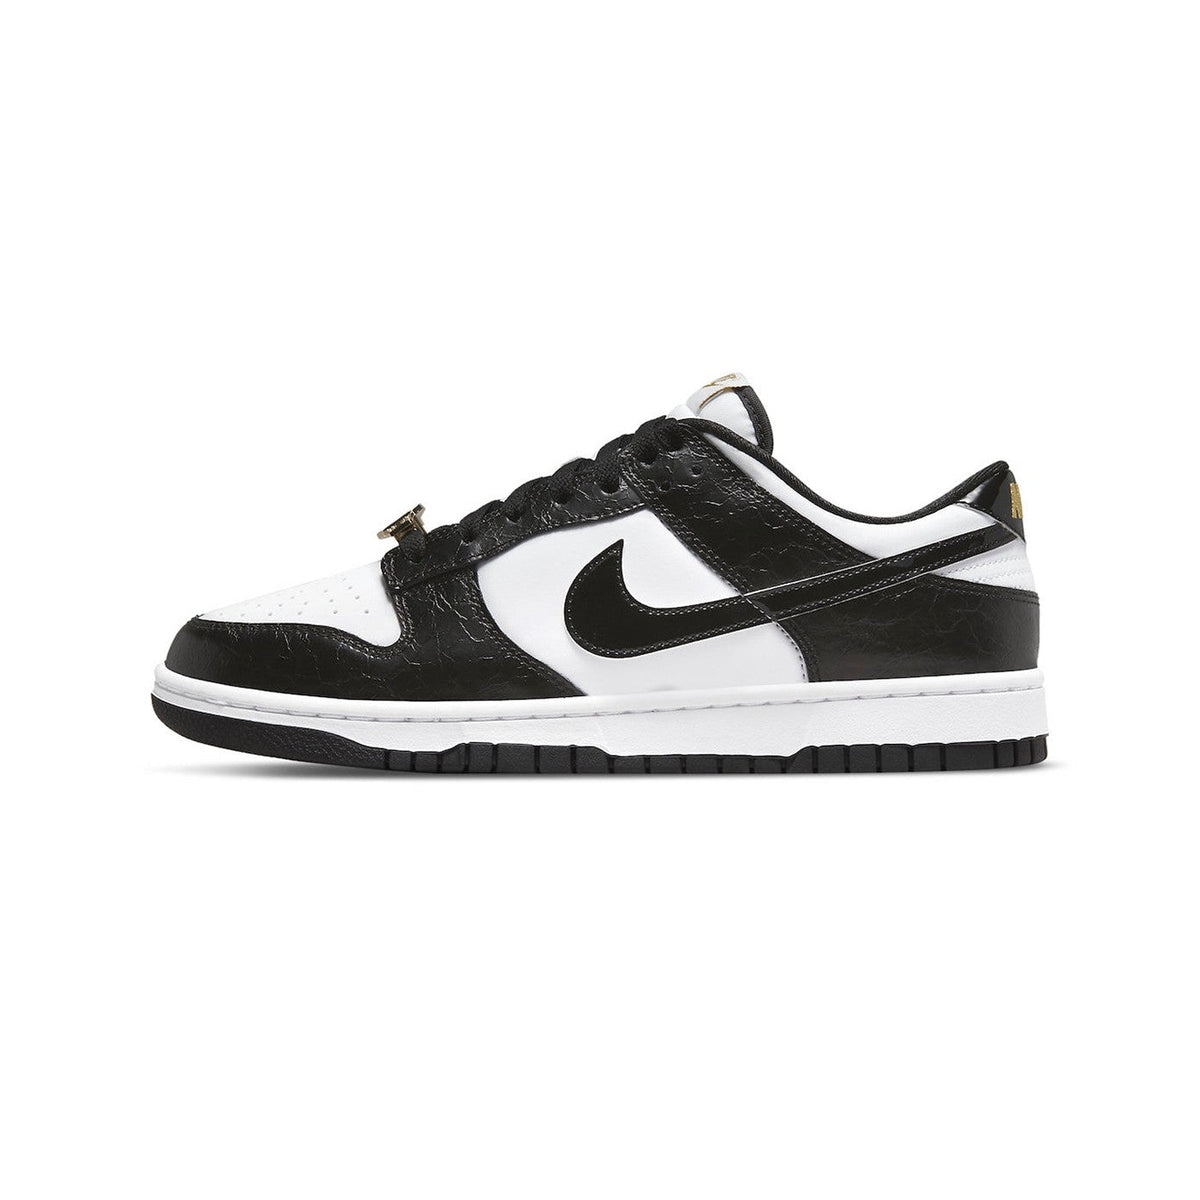 Nike Dunk Low World Champs Black White | Waves Never Die | Nike | Sneakers